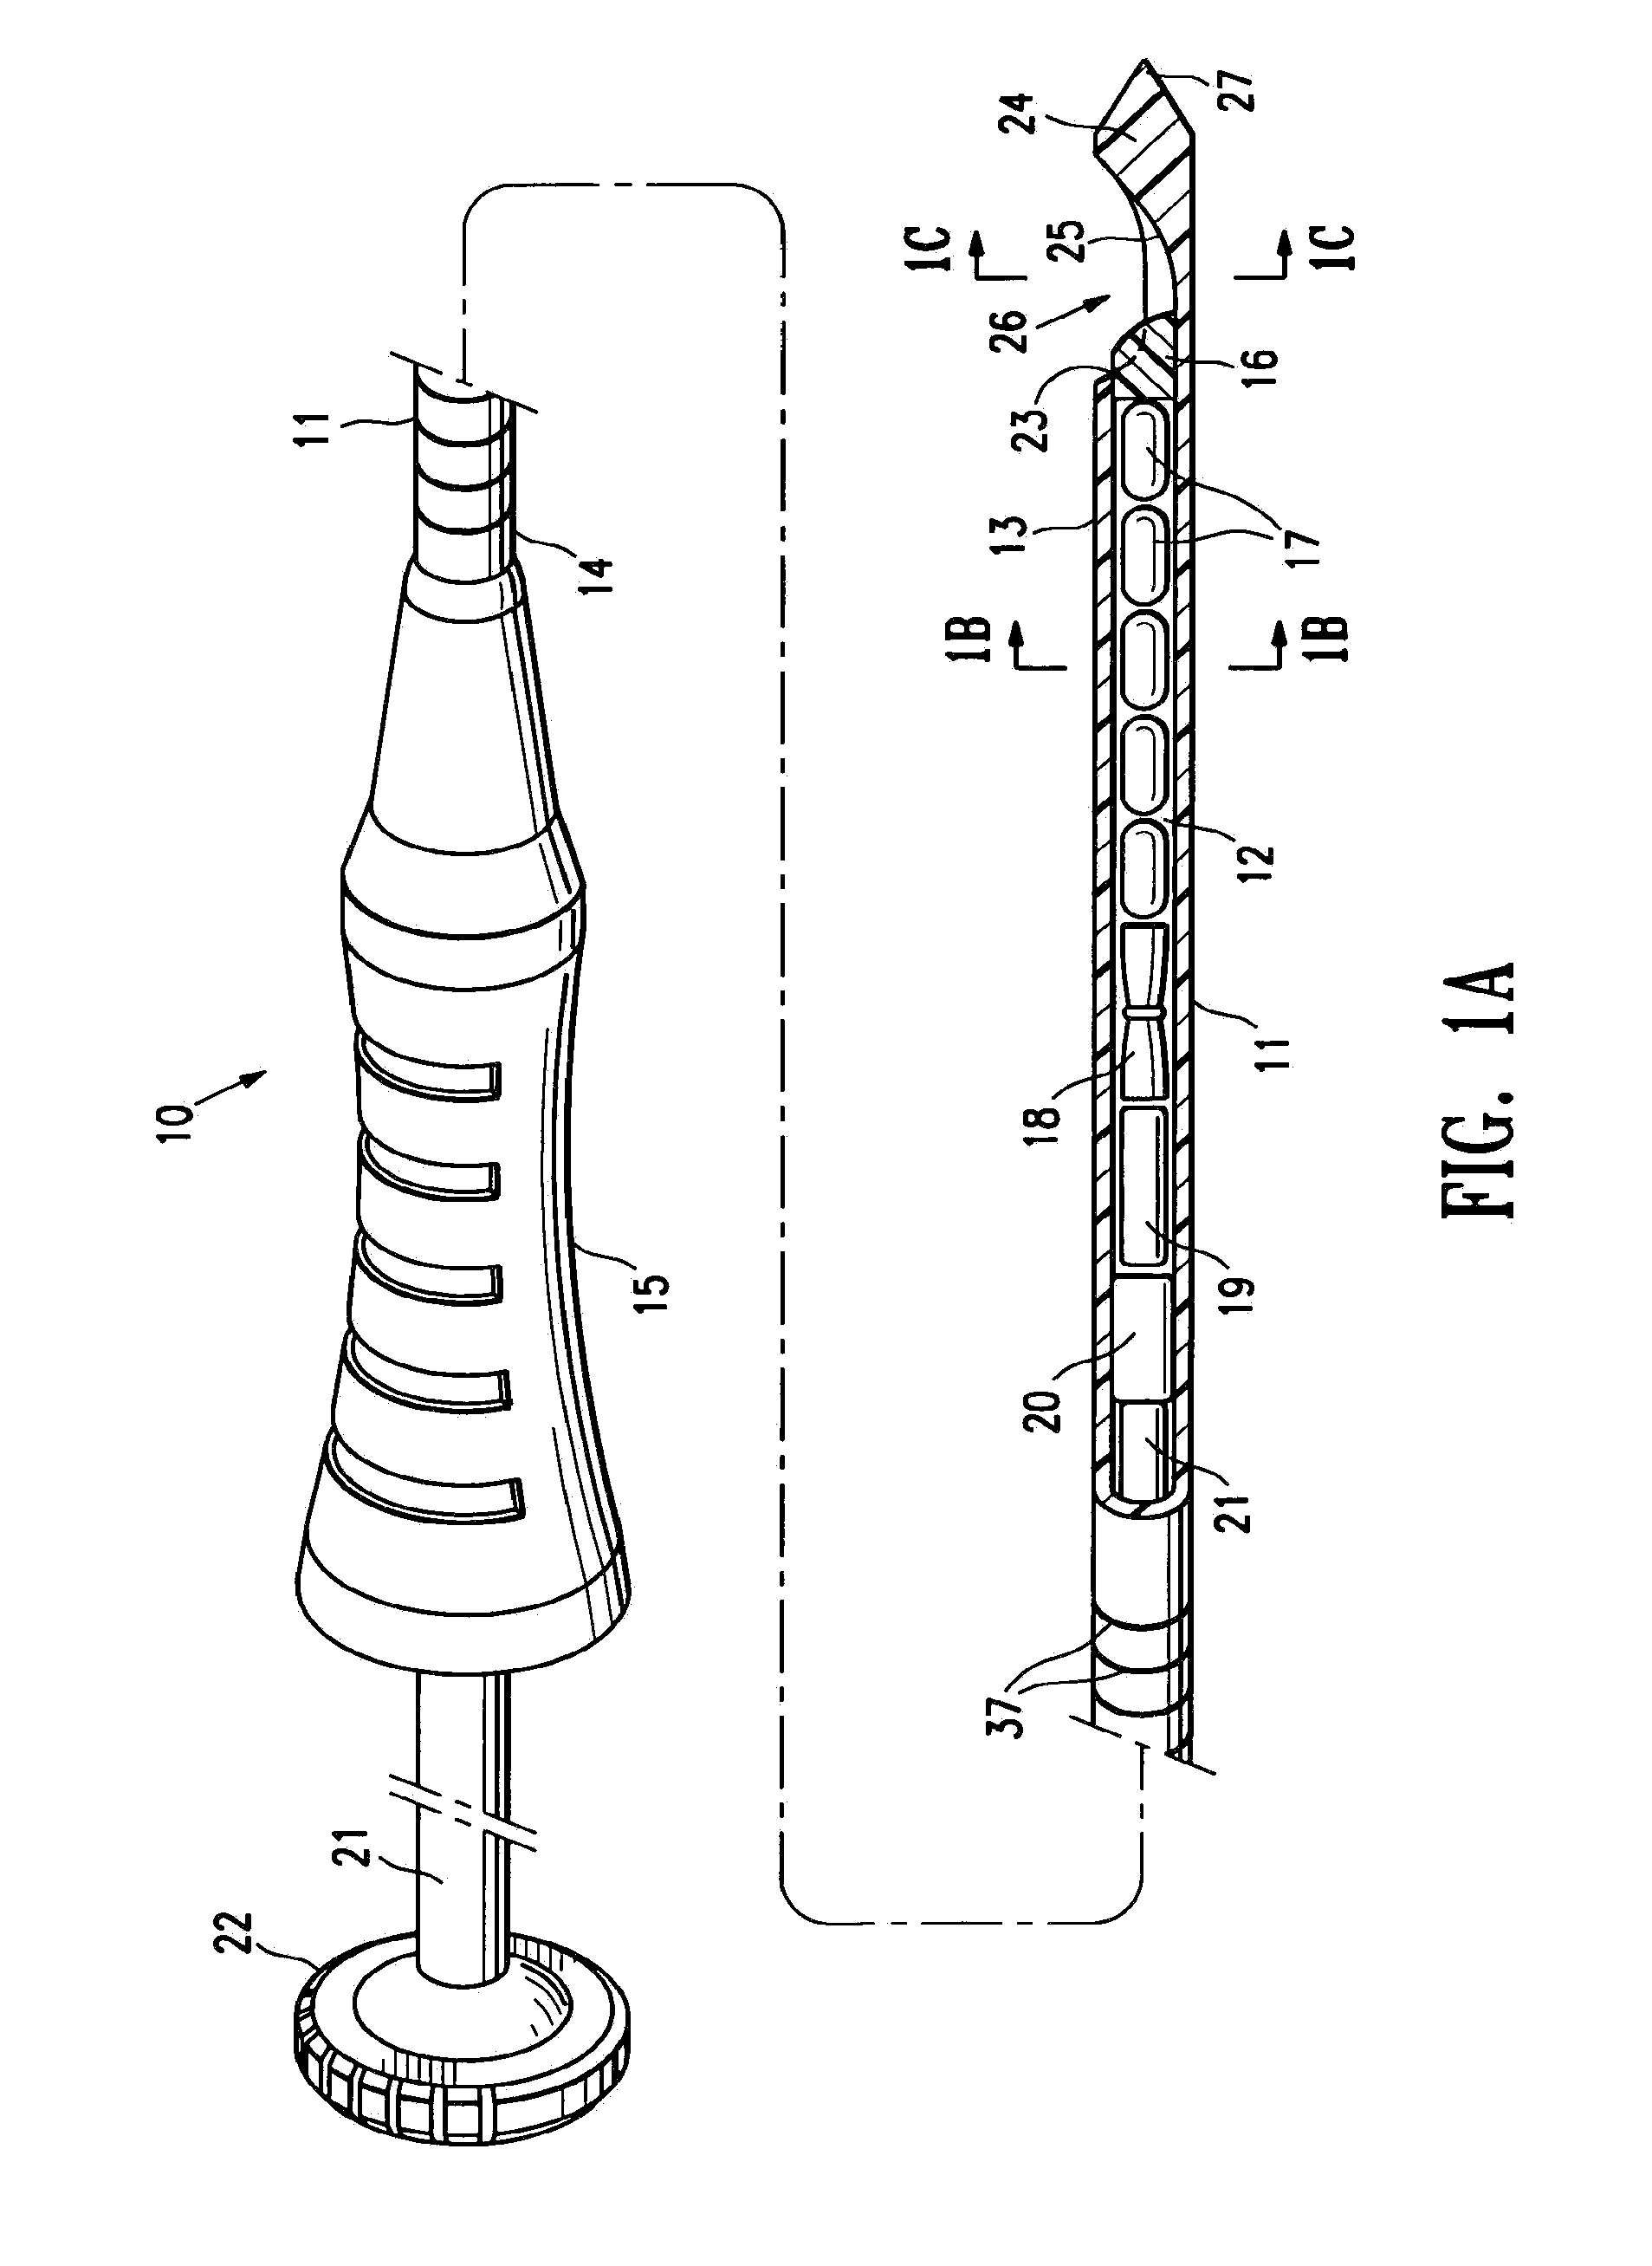 Intracorporeal marker and marker delivery device